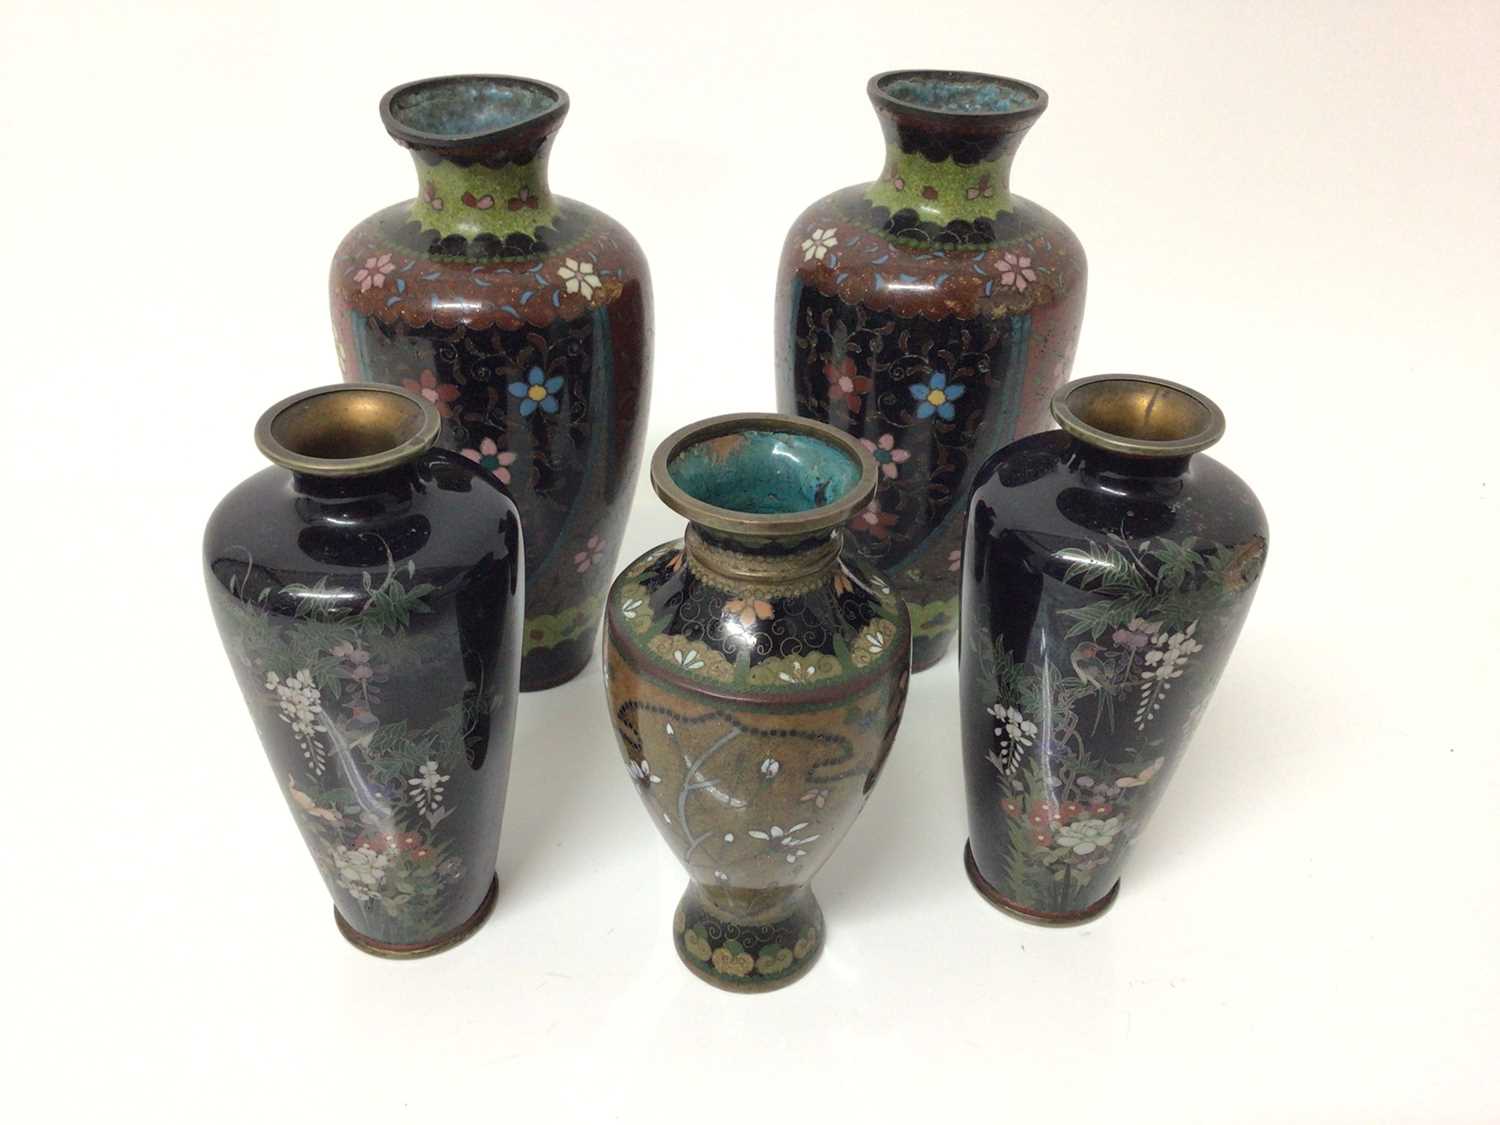 Lot 17 - Five Japanese cloisonné vases, circa 1900, including two pairs and another, the largest measuring 15.5cm high